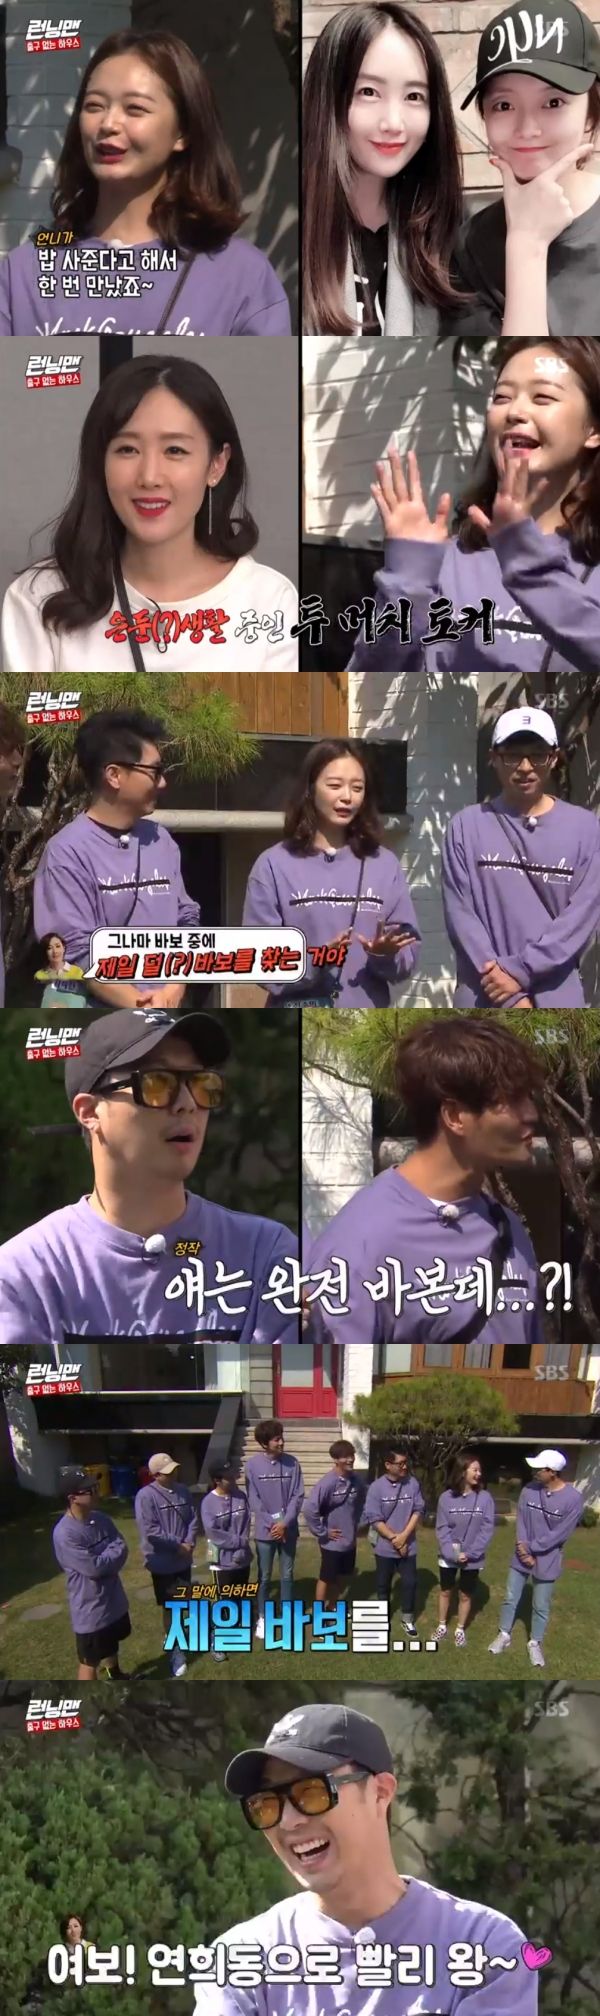 Jeon So-min tells anecdote about Tumer Chit Talker starOn SBS Running Man broadcasted on the 20th, Jeon So-min mentioned the meeting with the star.On the day of the broadcast, Jeon So-min said of the star, I met because the Sister bought me rice.Jeon So-min laughed, saying the star was all men are fools, but they are looking for less of fools.Yoo Jae-Suk pointed to Haha and laughed, saying, The best fool.Mr. Star also has a bit of a temperament, added Yoo Jae-Suk, who added: Sister says too much.I could not take my mouth once while I was eating rice. Haha, who watched, said, Love counseling is very .. And Yoo Jae-Suk added, You are proud.Prior to the race, Yoo Jae-Suk was nervous about listening to the special lecture on Mr. Stars love (lets start), and Jeon So-min laughed, saying, Sister can fill all six hours.